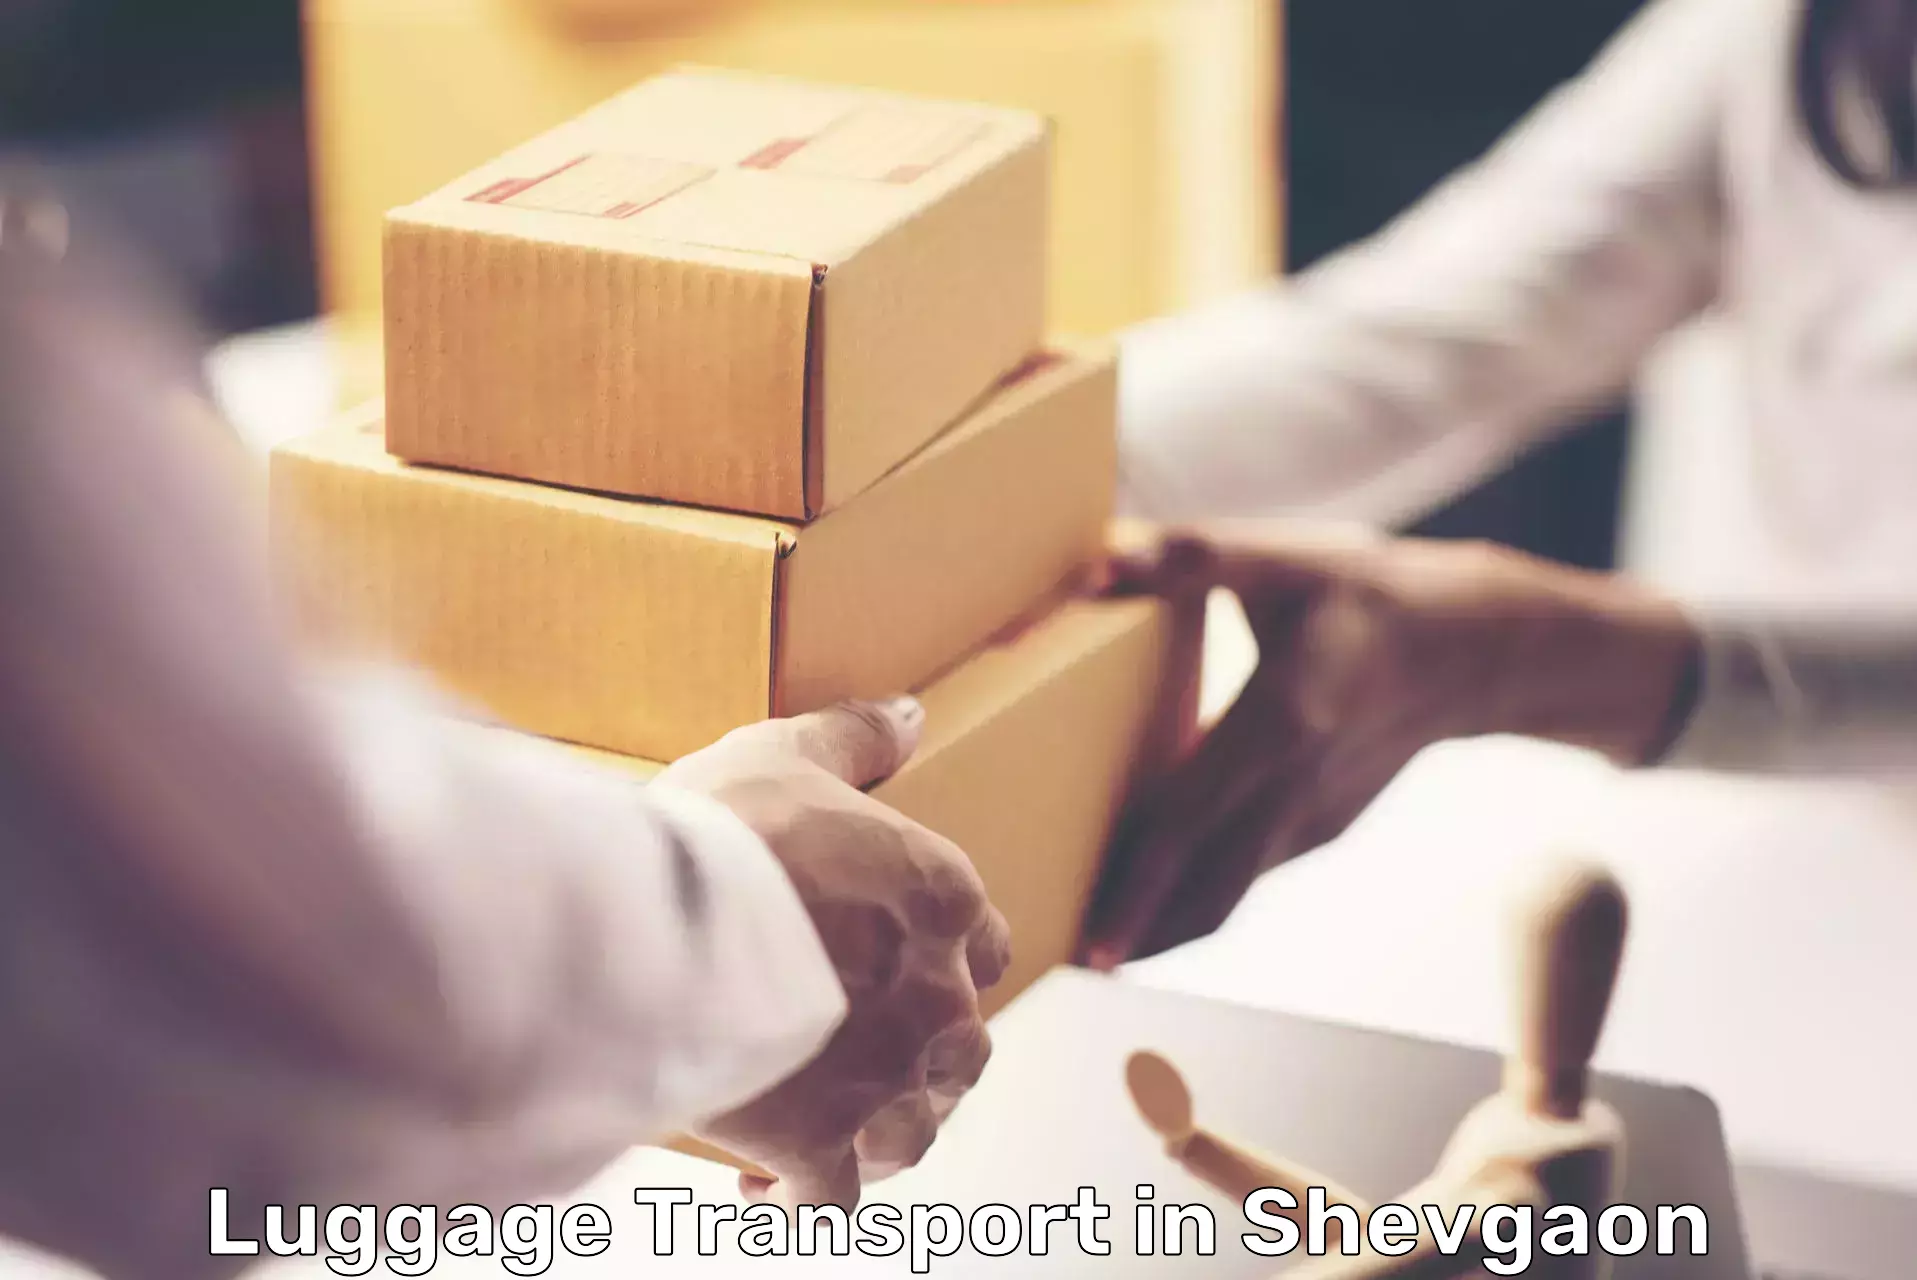 Luggage shipping service in Shevgaon